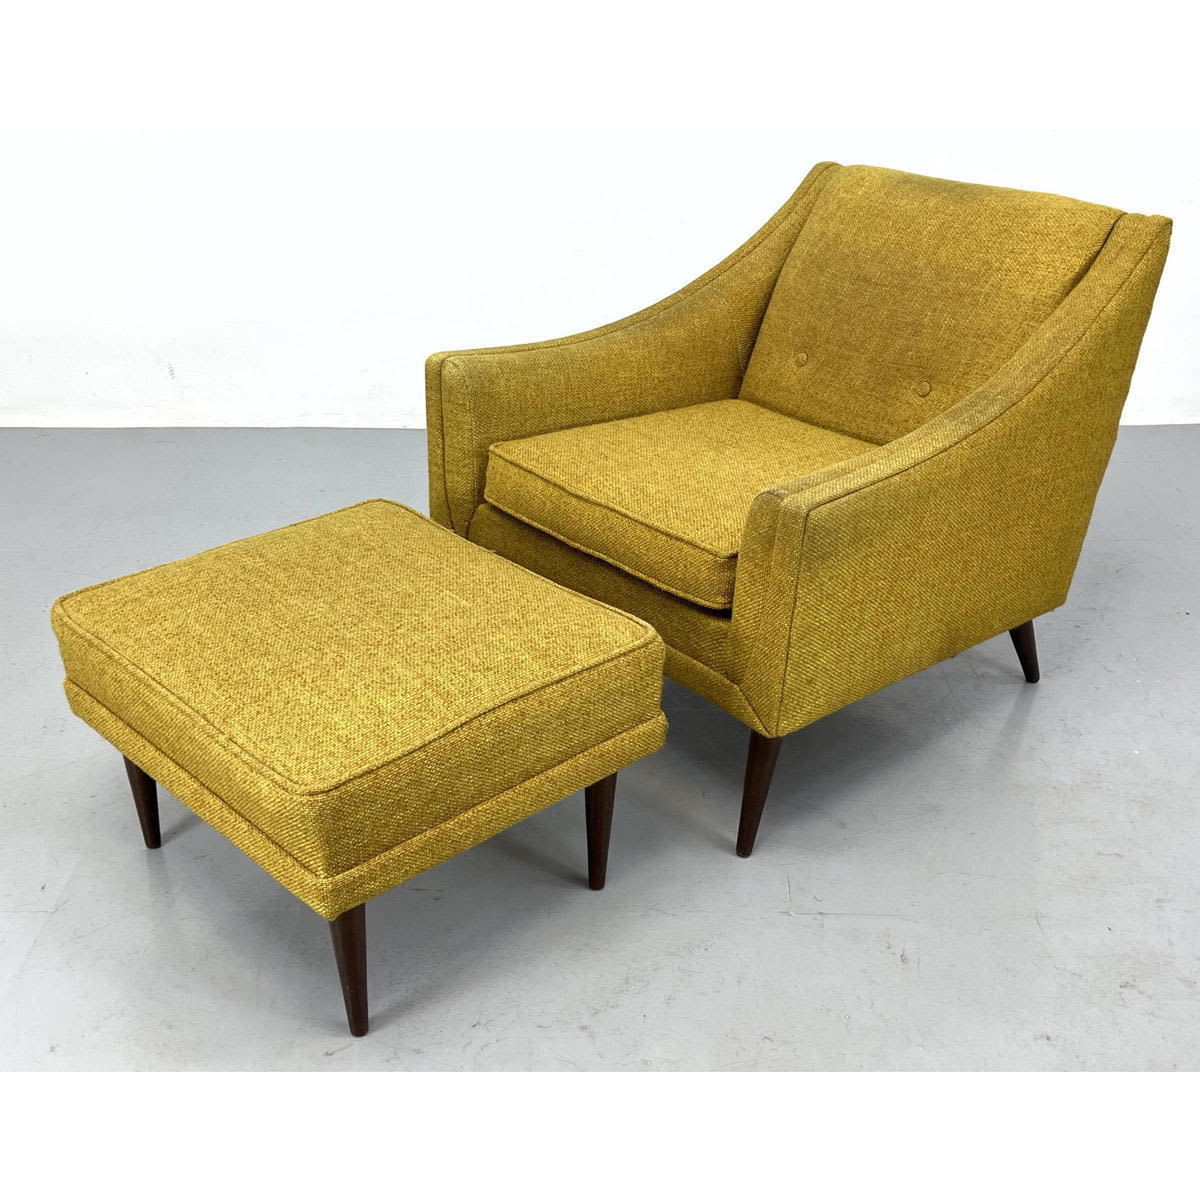 KROEHLER lounge chair and Ottoman